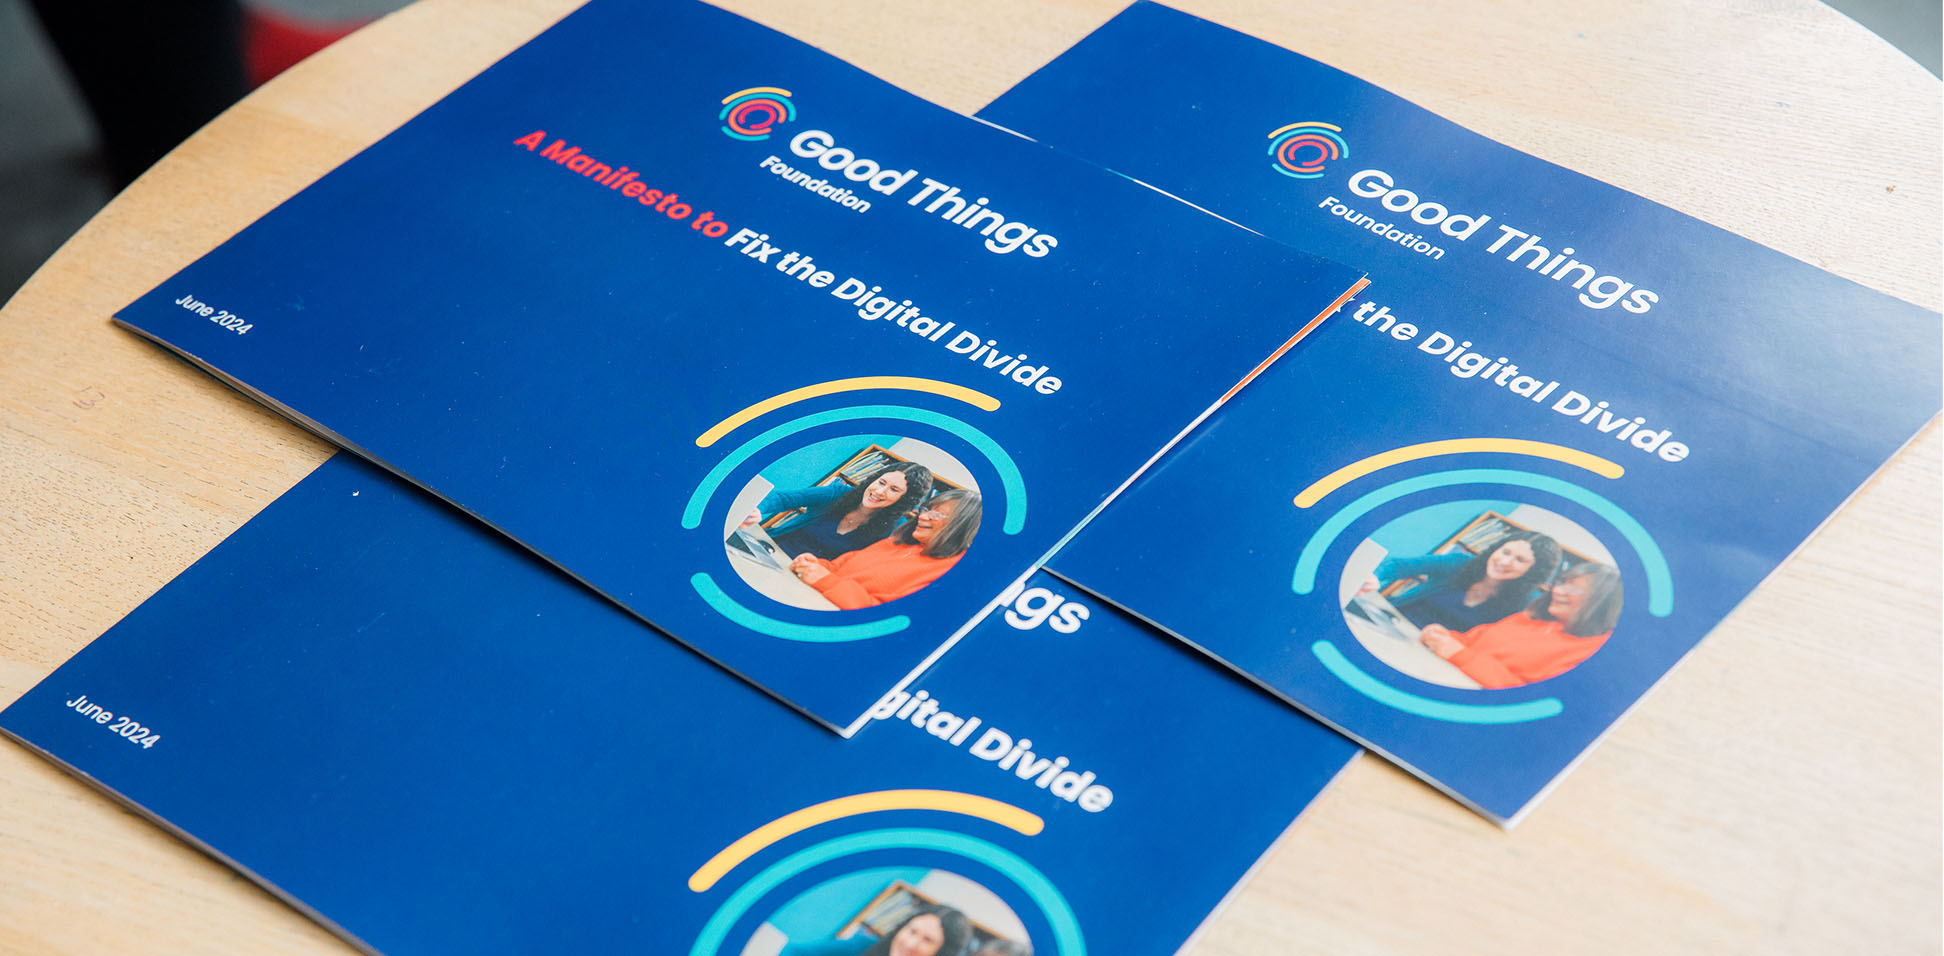 This image shows a printed booklet of our Manifesto to Fix The Digital Divide